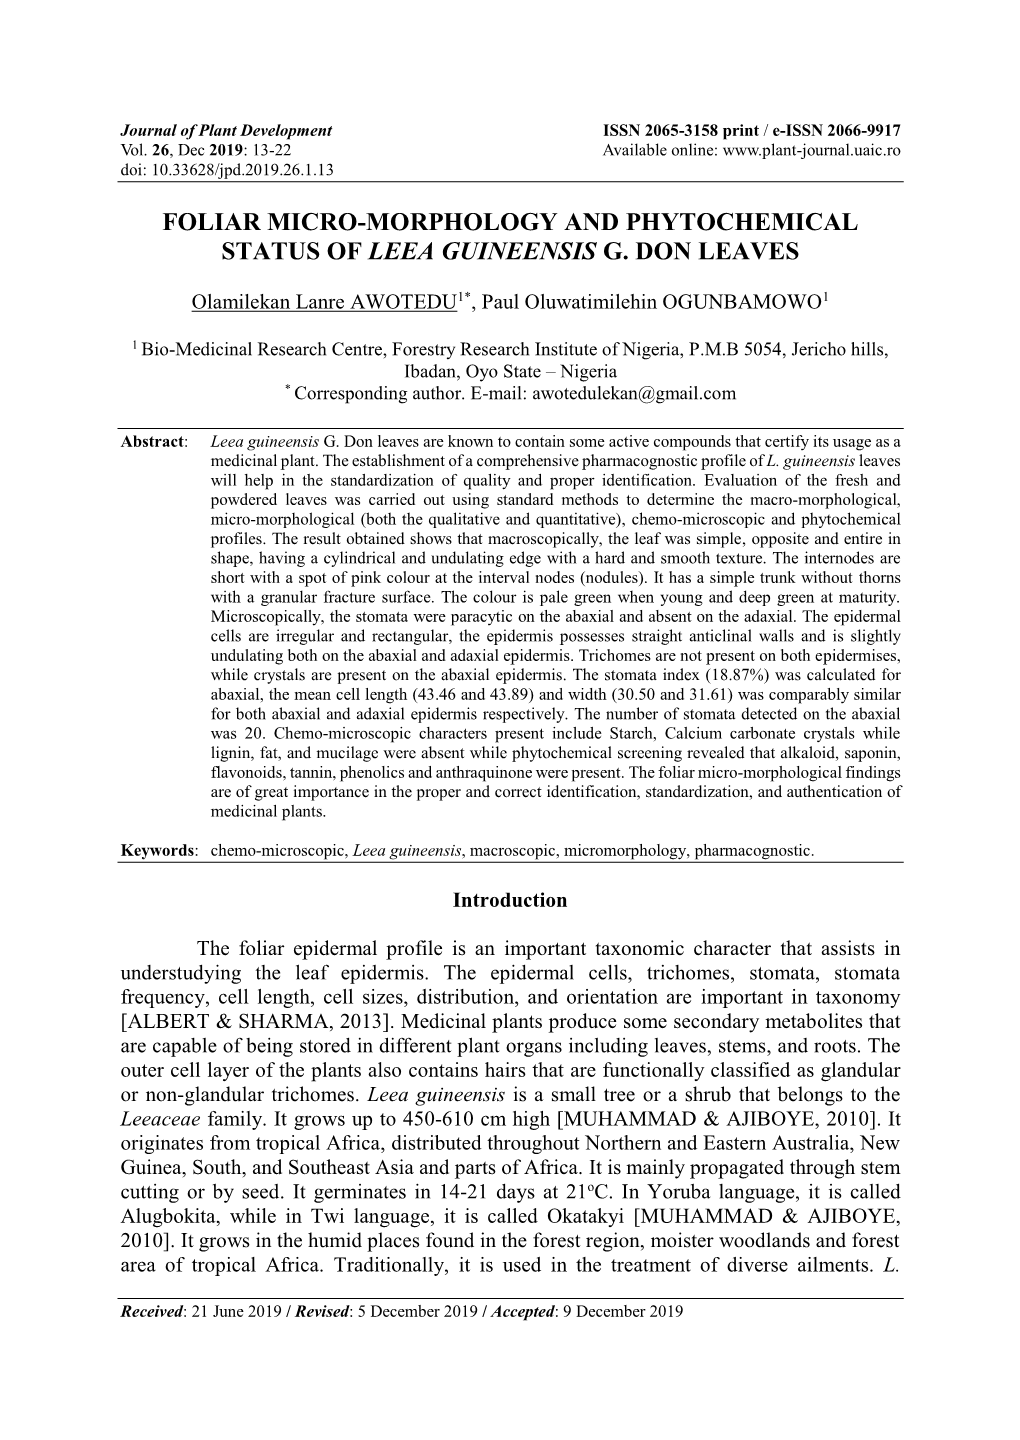 Foliar Micro-Morphology and Phytochemical Status of Leea Guineensis G